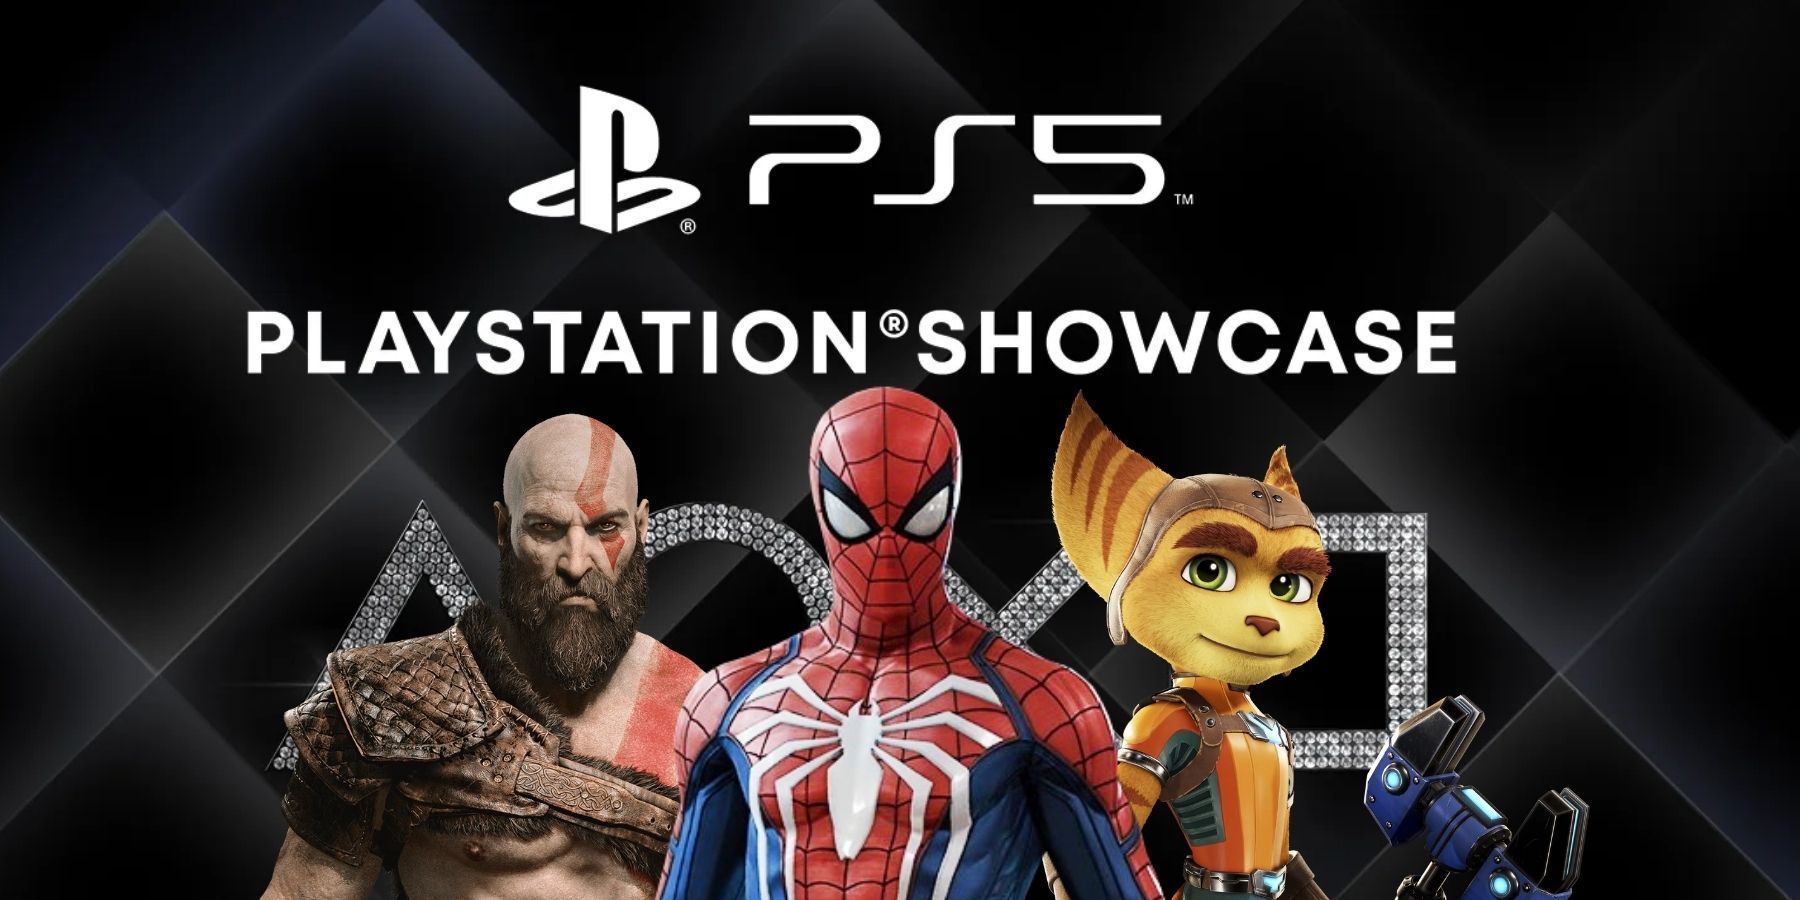 Is a PlayStation Showcase Really Happening This Year?